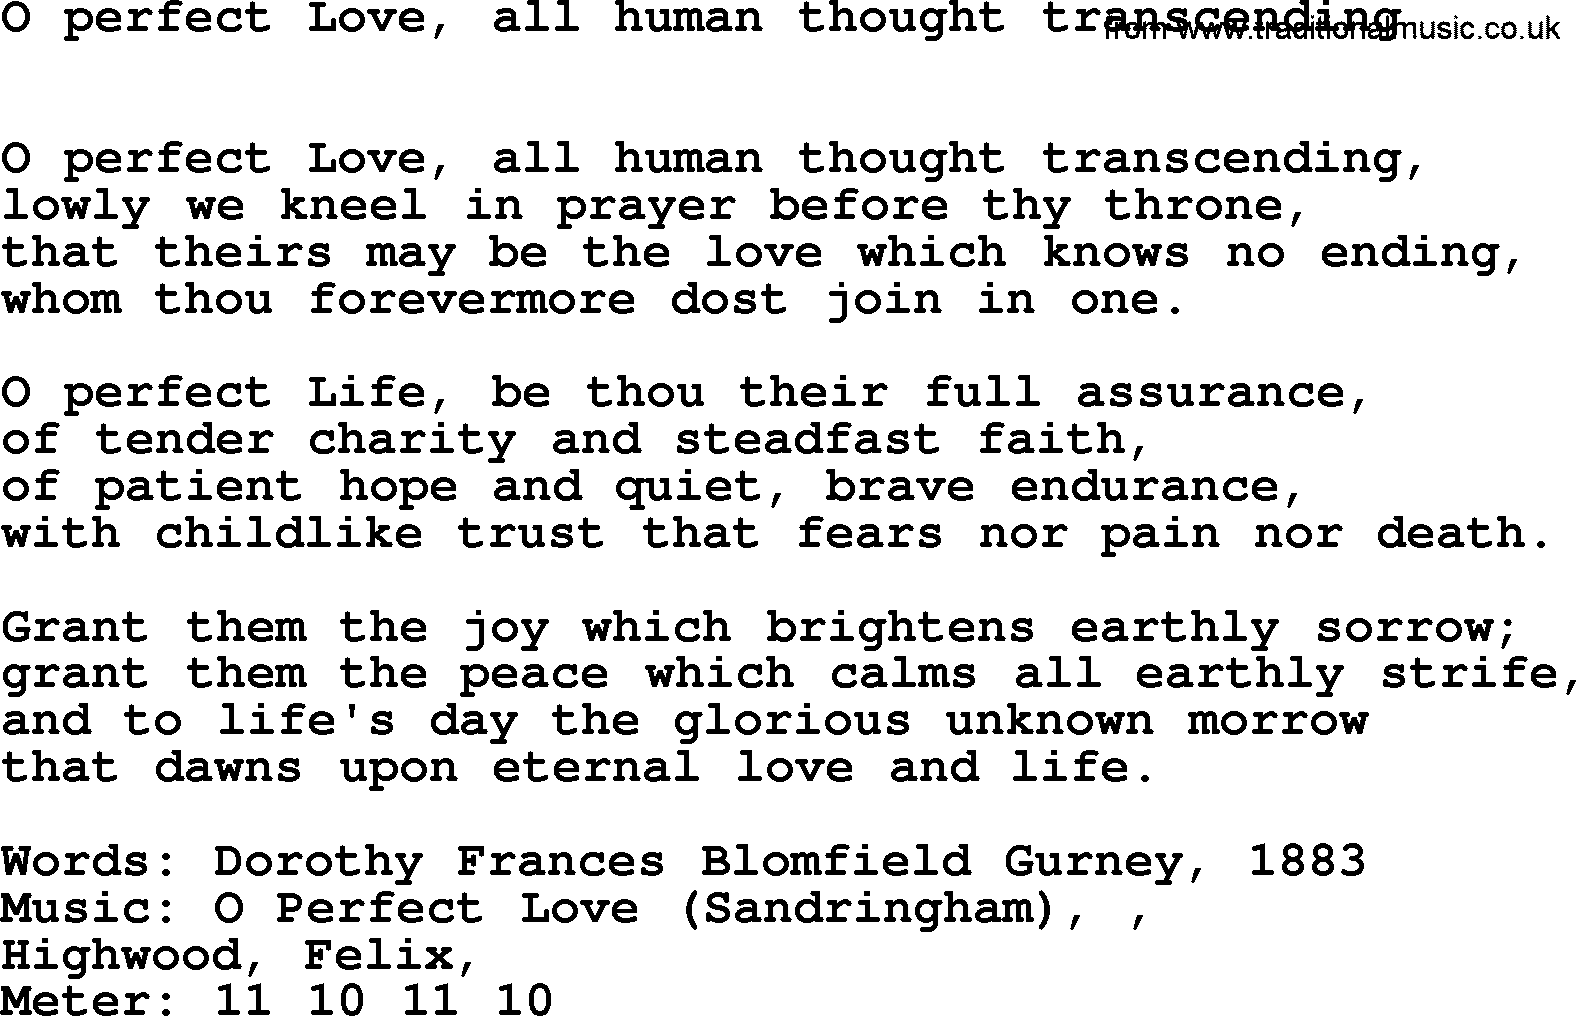 Book of Common Praise Hymn: O Perfect Love, All Human Thought Transcending.txt lyrics with midi music